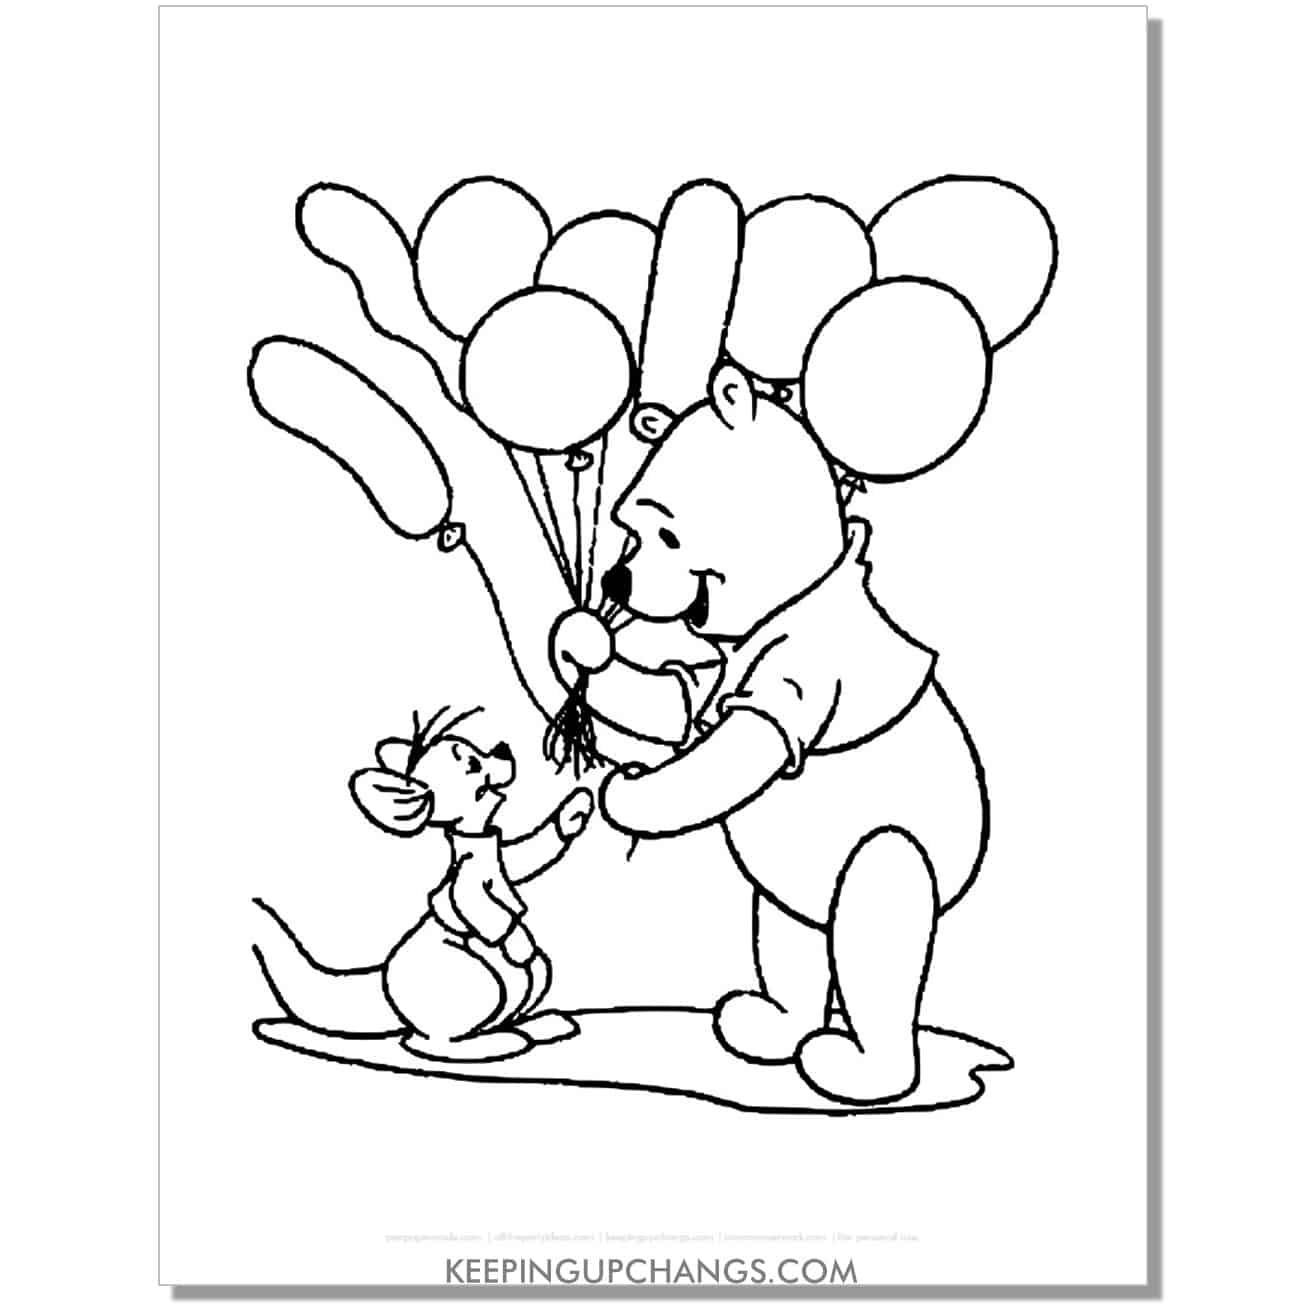 winnie the pooh and roo with balloons coloring page, sheet.